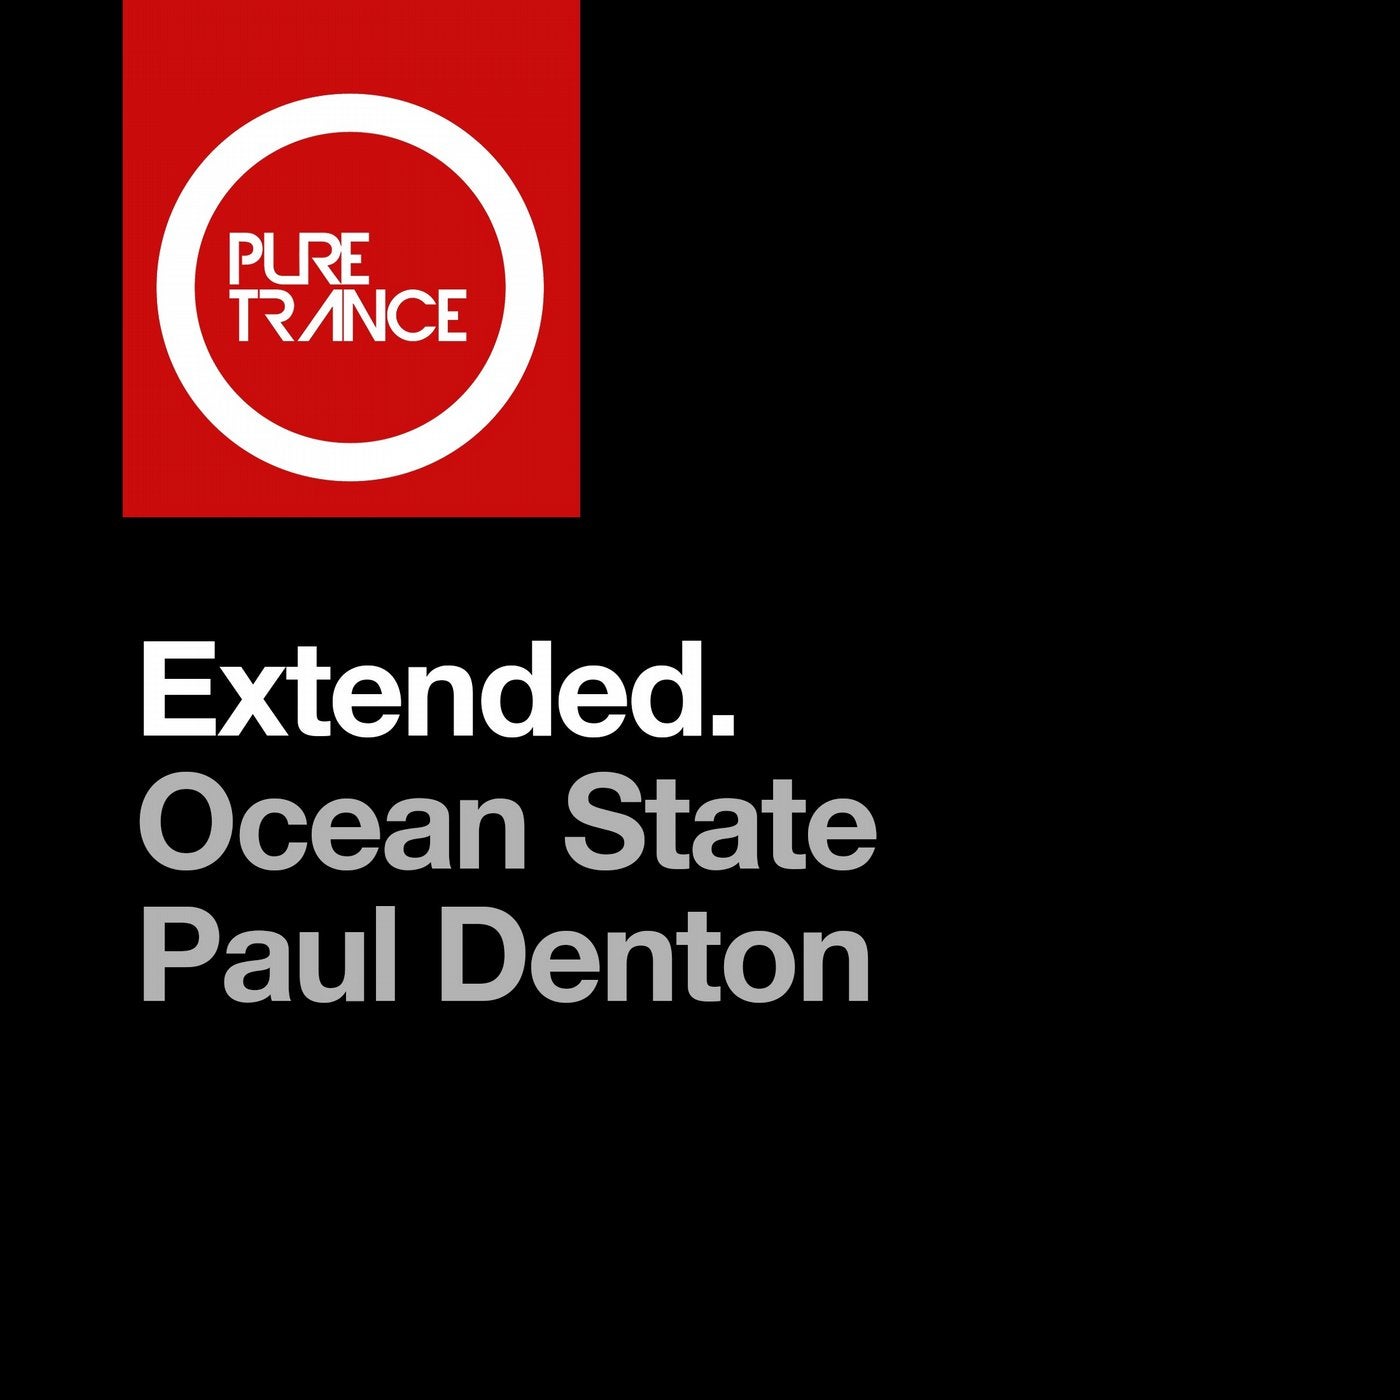 Pure Trance Extended